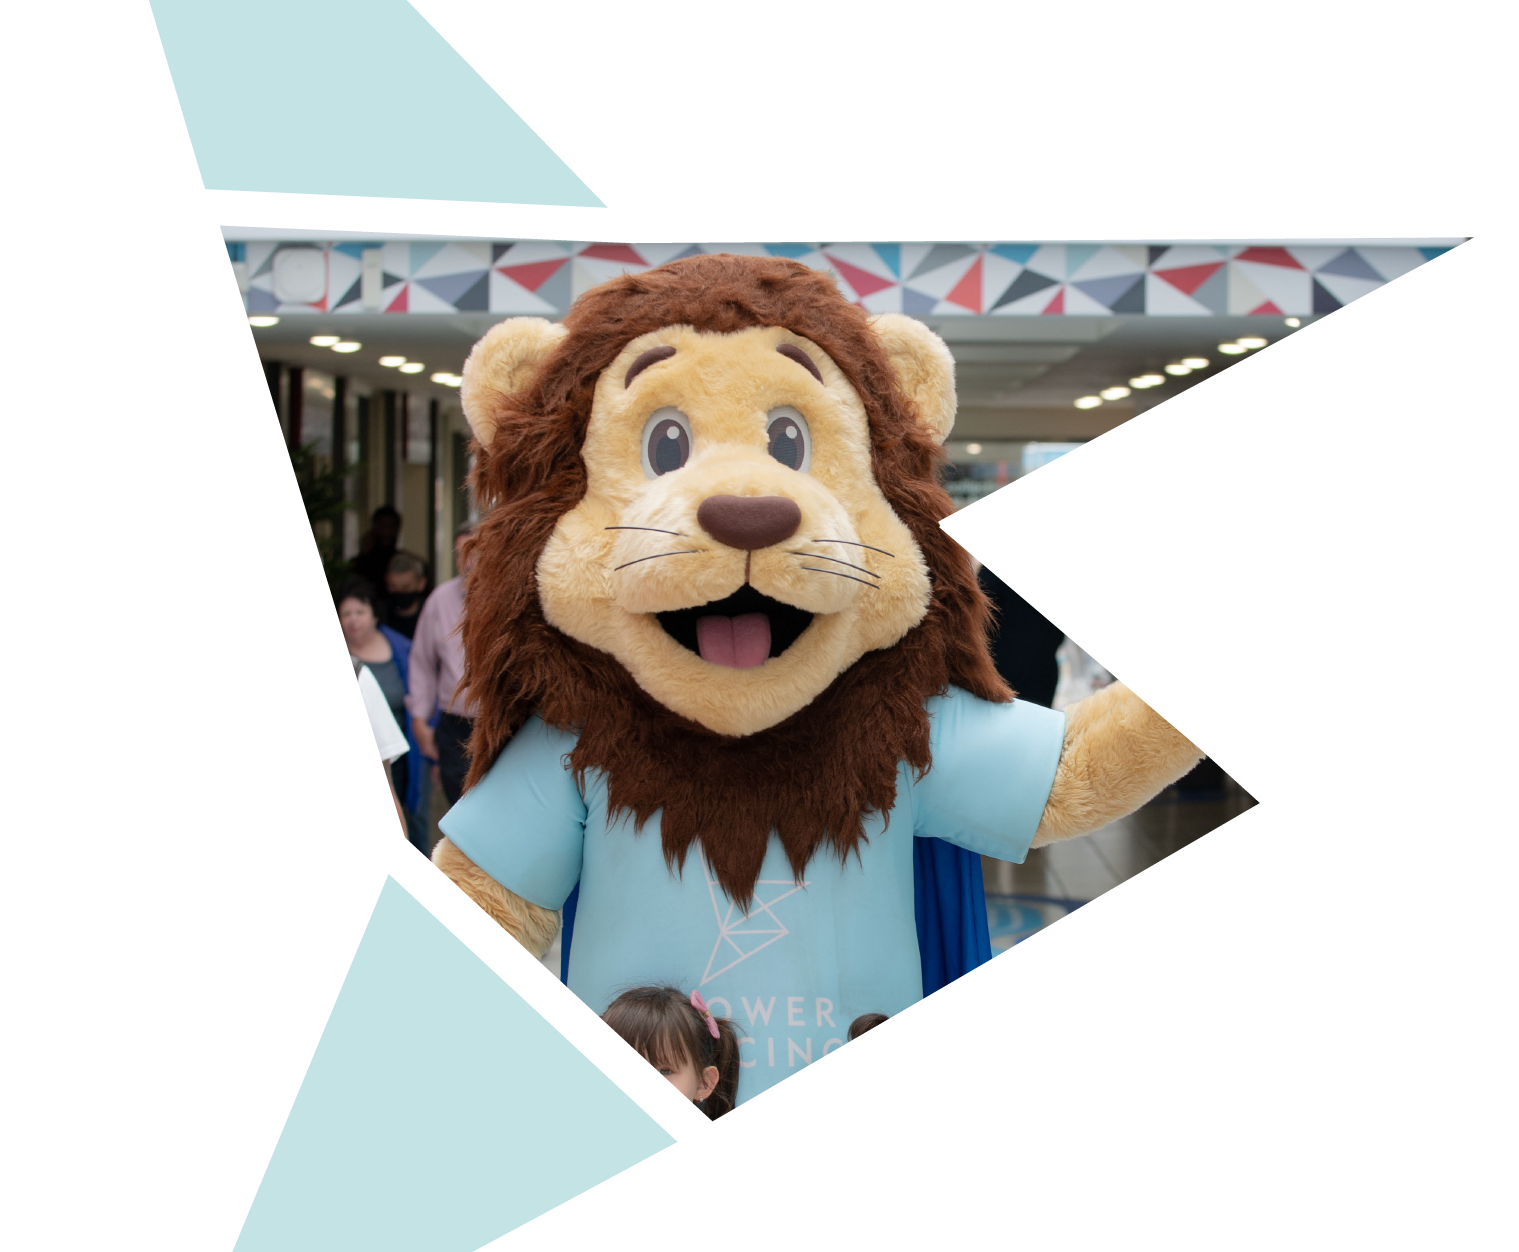 Lennie the lion from Cubs club at Lower Precinct